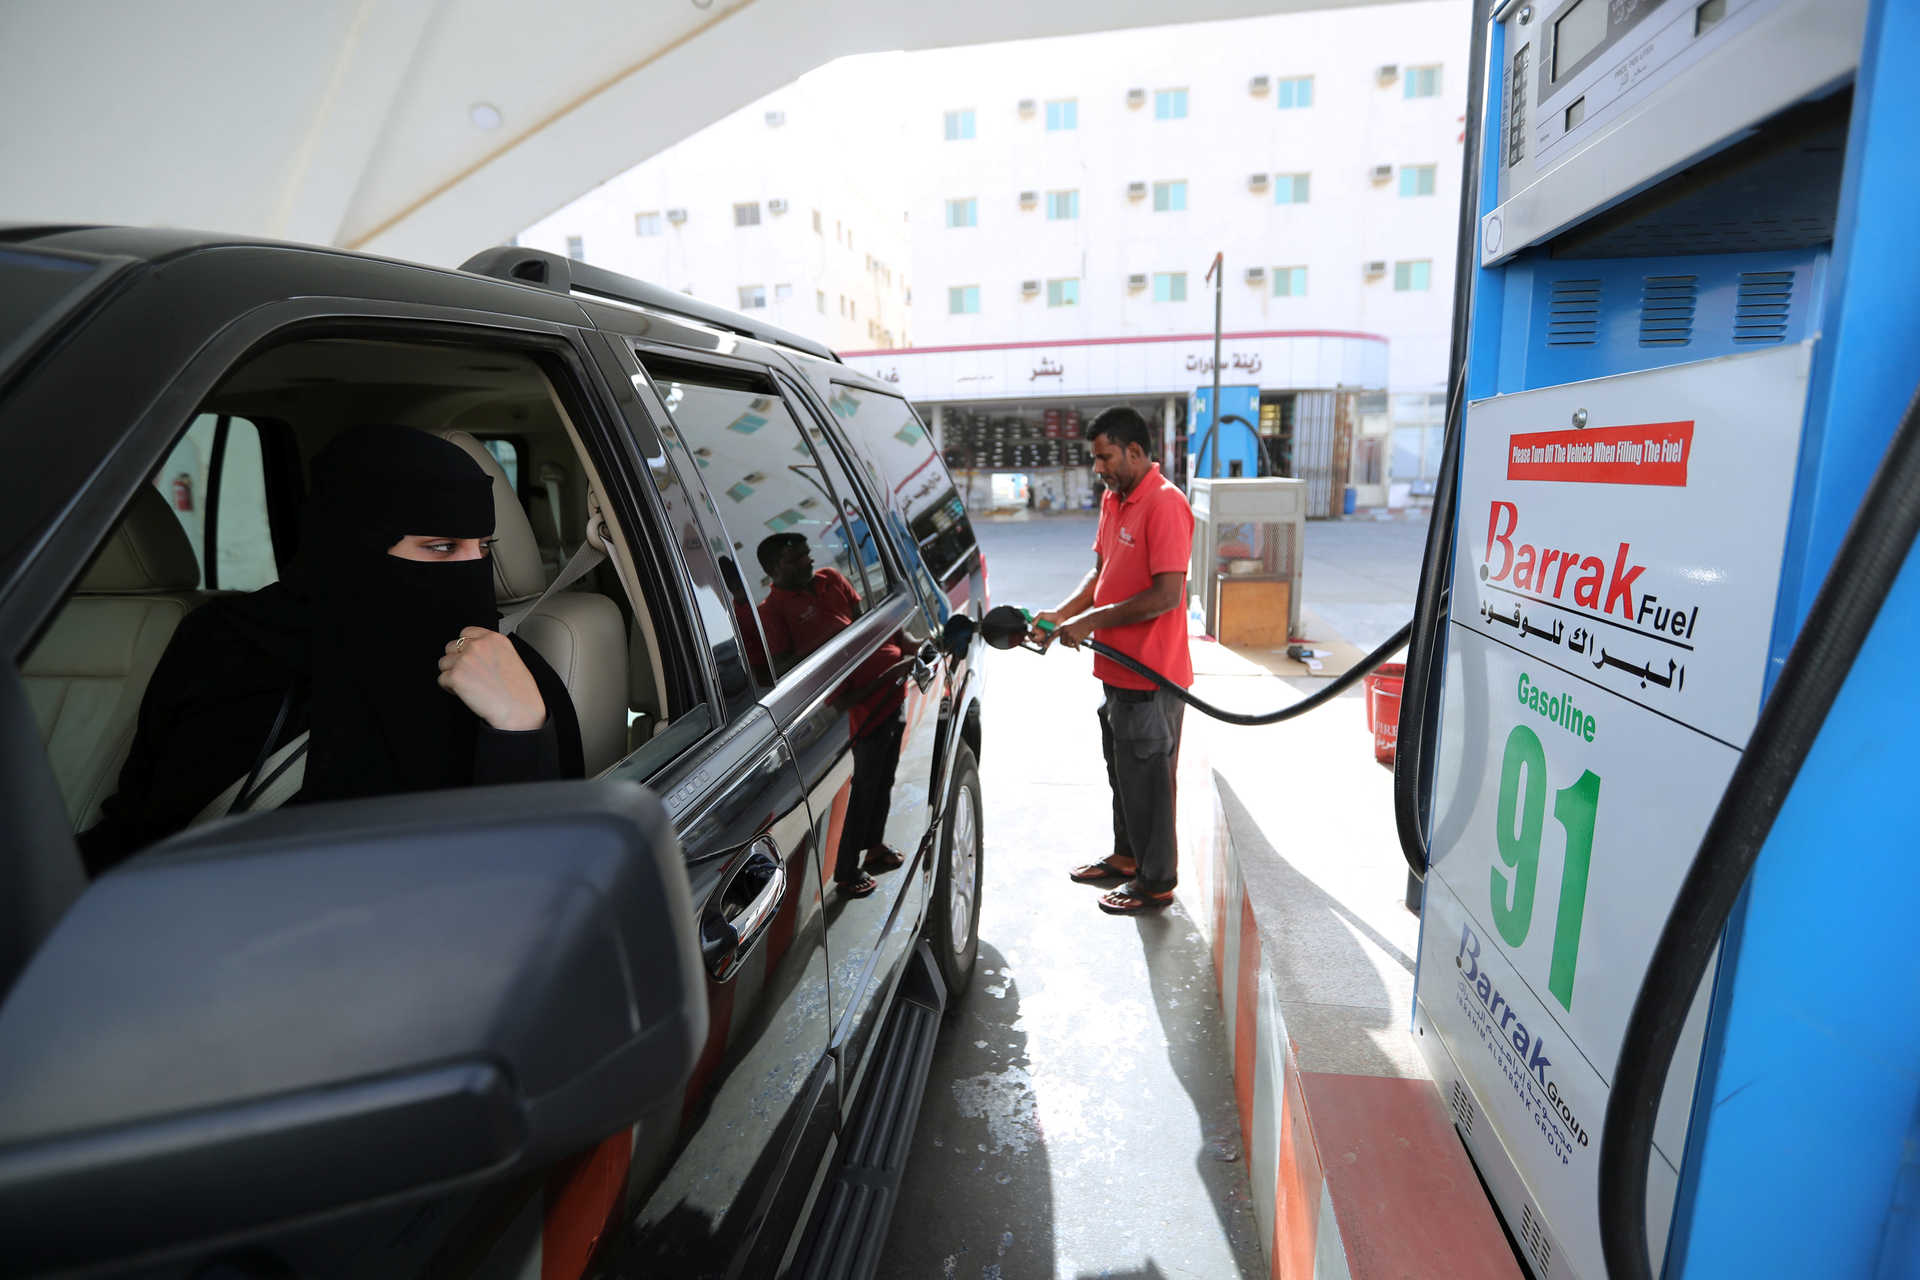 A Saudi woman, Amira, who works in Aramco, refuels her car as she makes her way to her office in Dammam